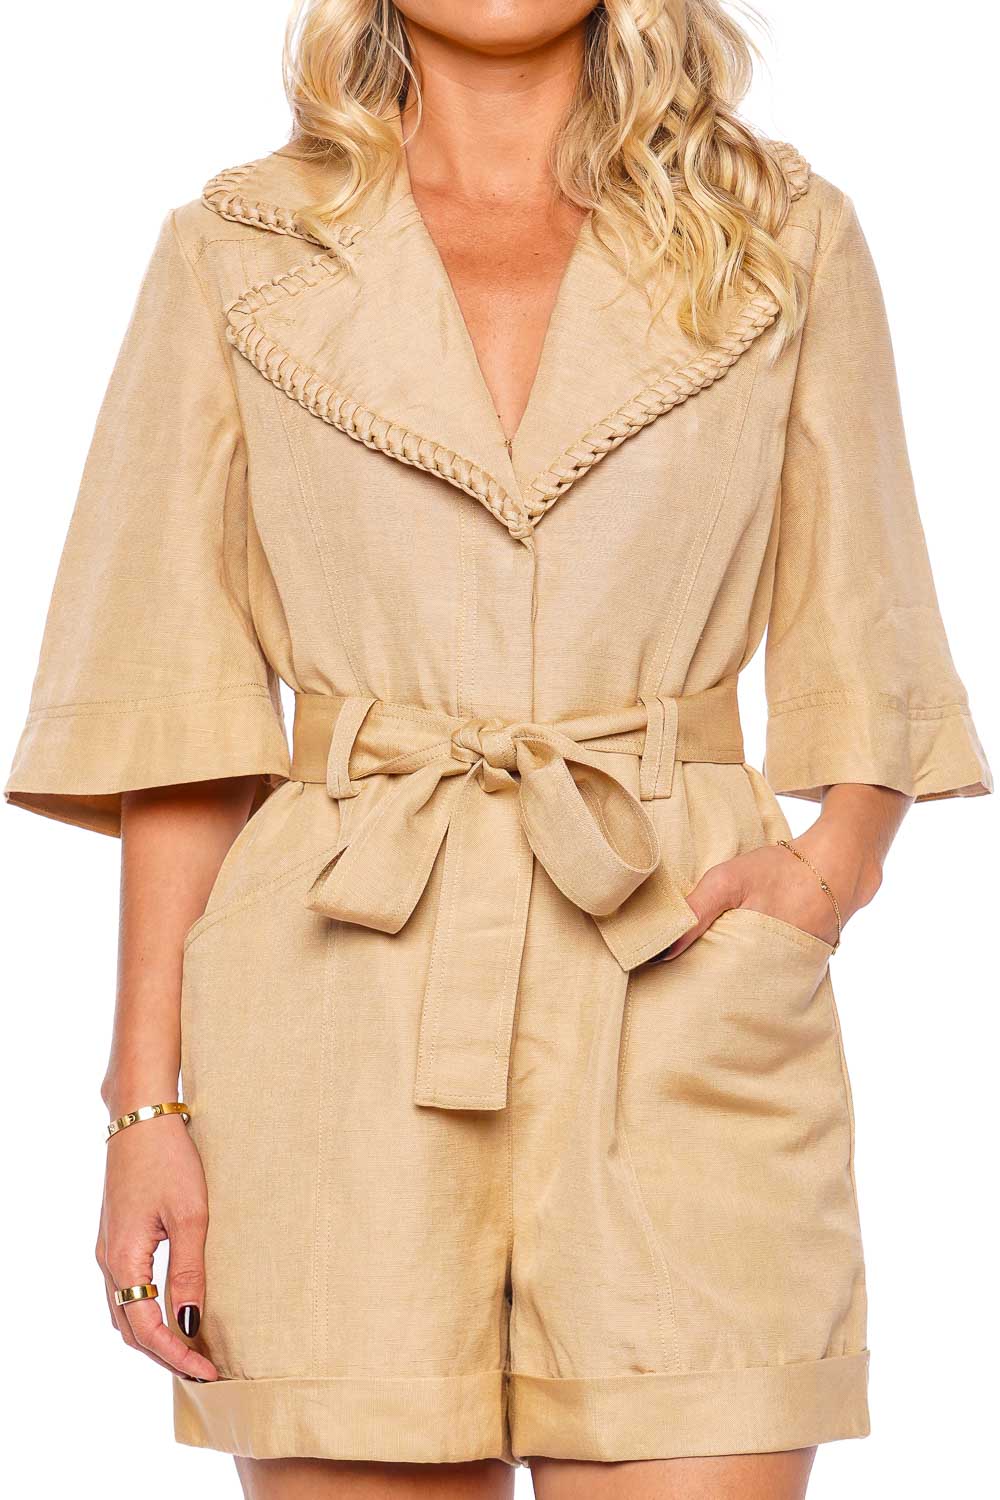 Aje. Tactile Whipstitch Belted Playsuit